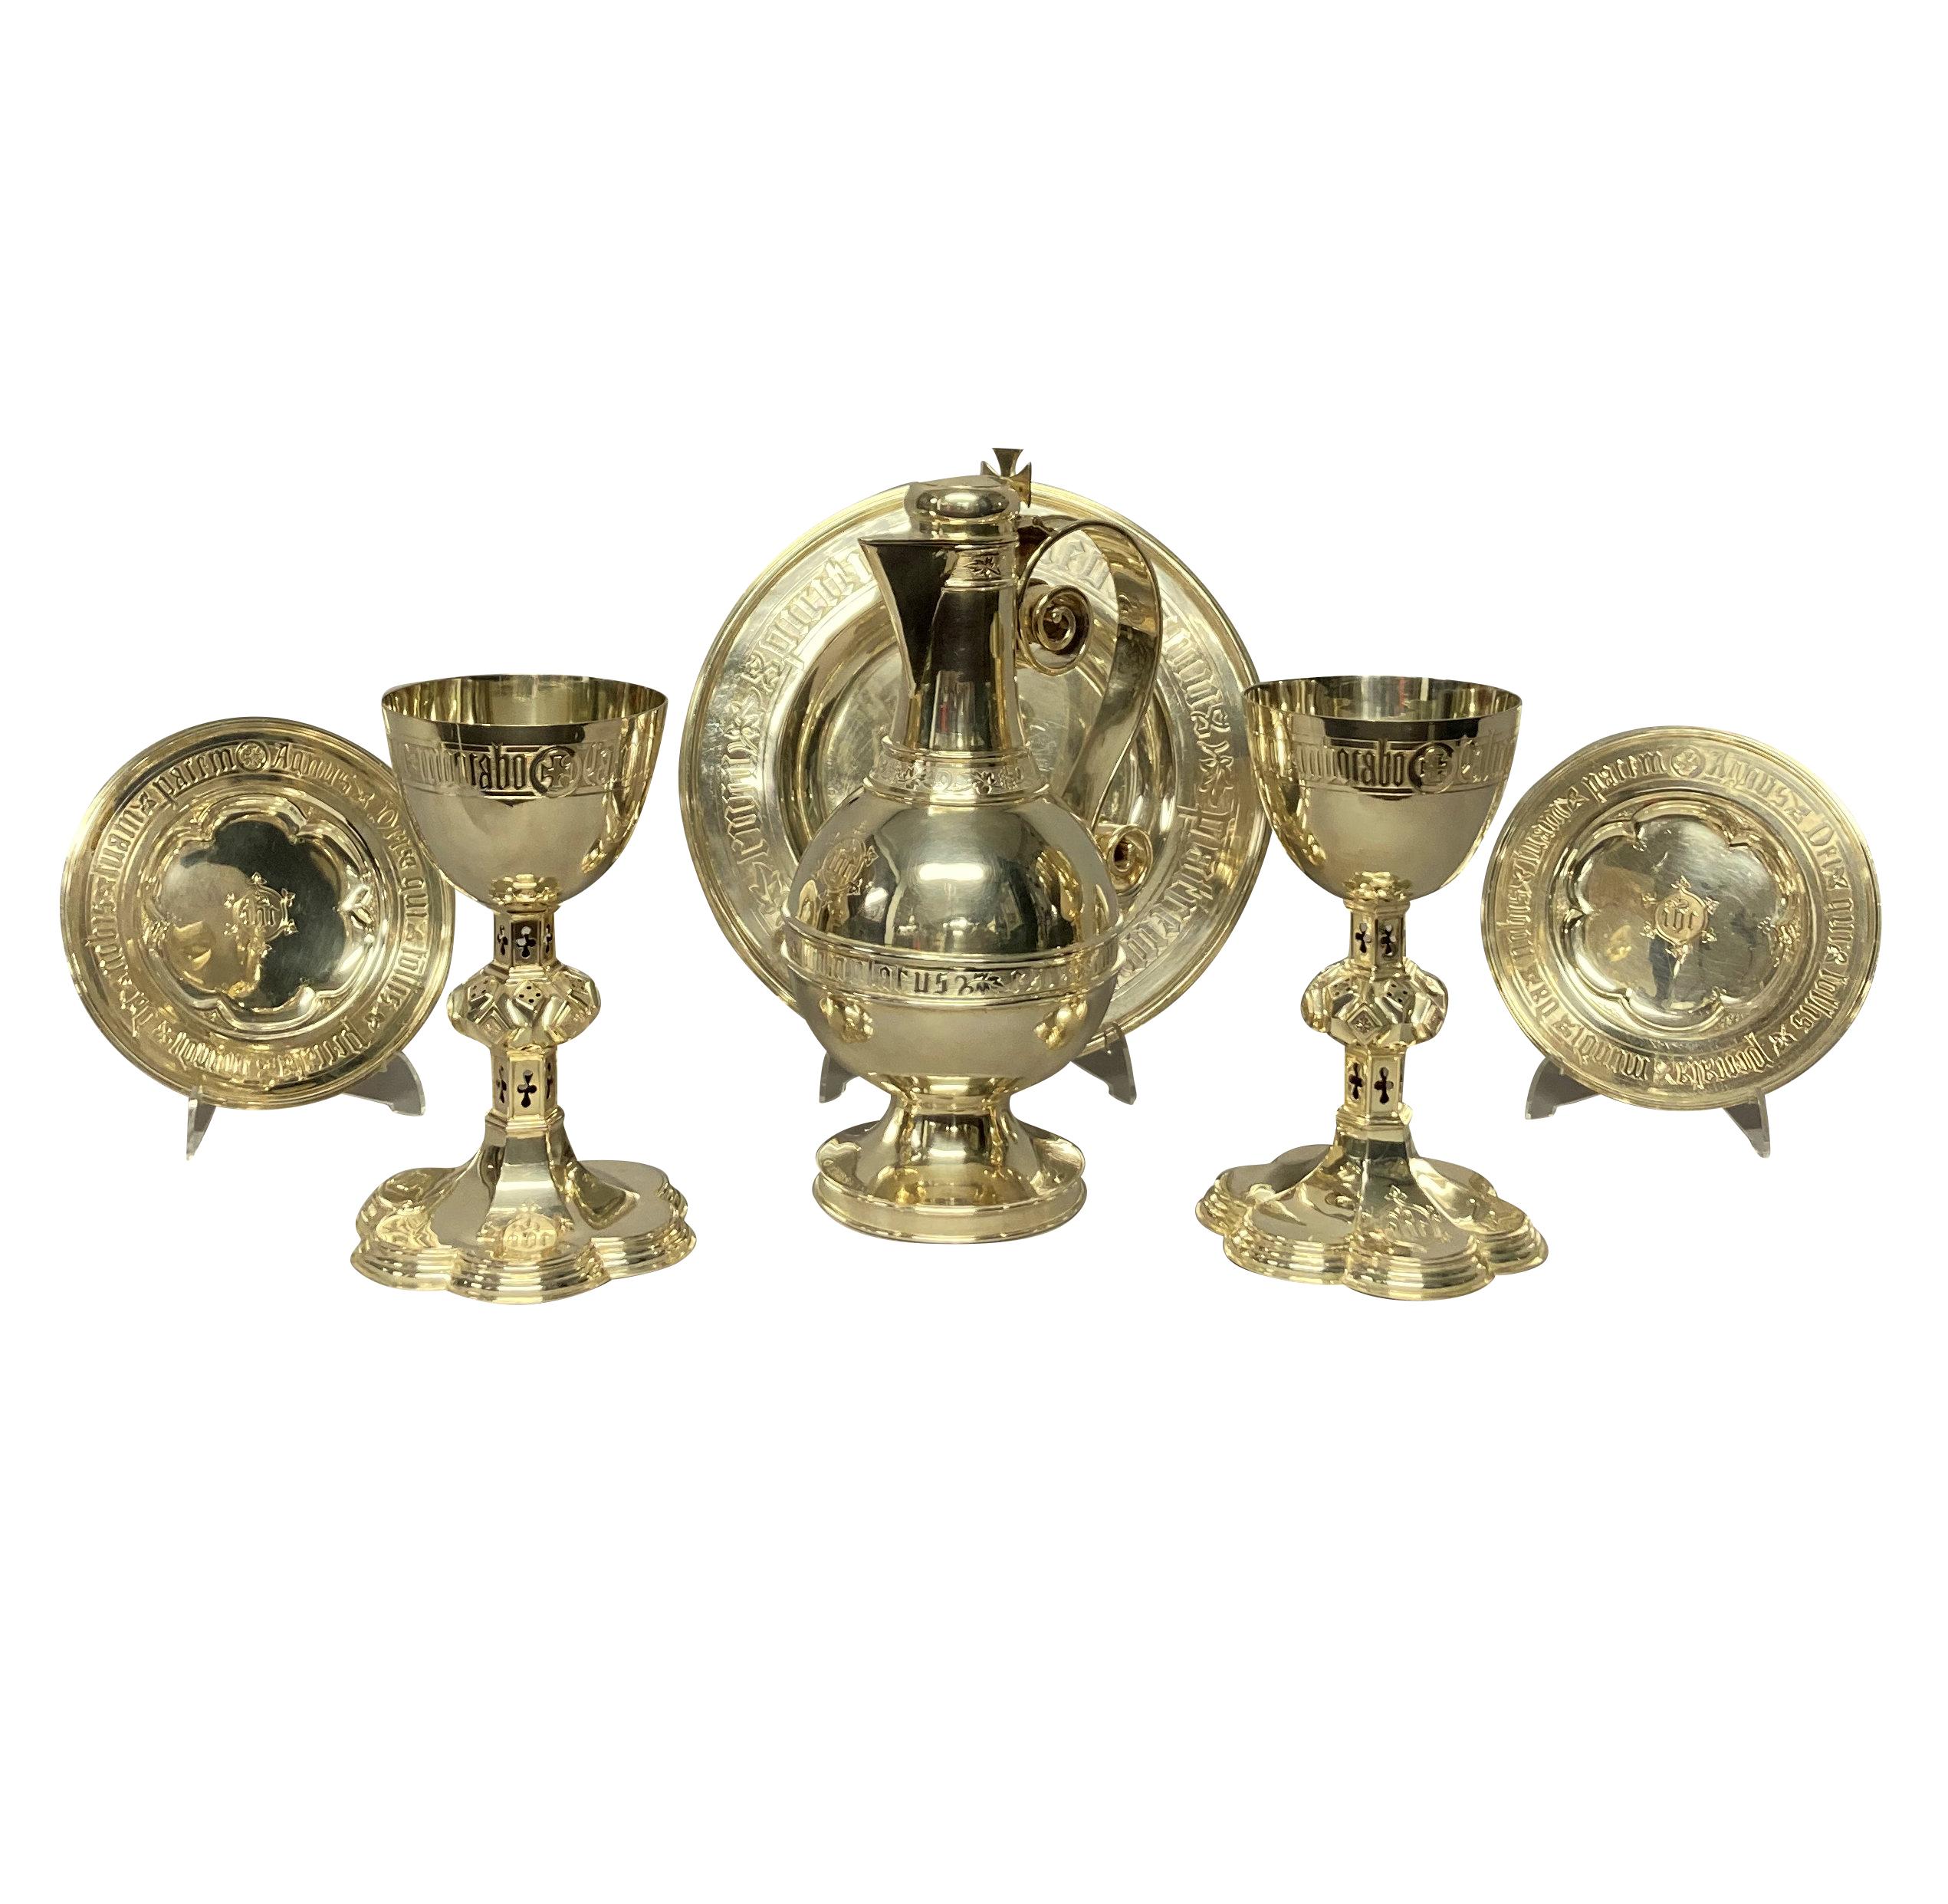 Silver Plate Gothic Silver Communion Set with Original Box by Henry Wilkinson & Sons For Sale